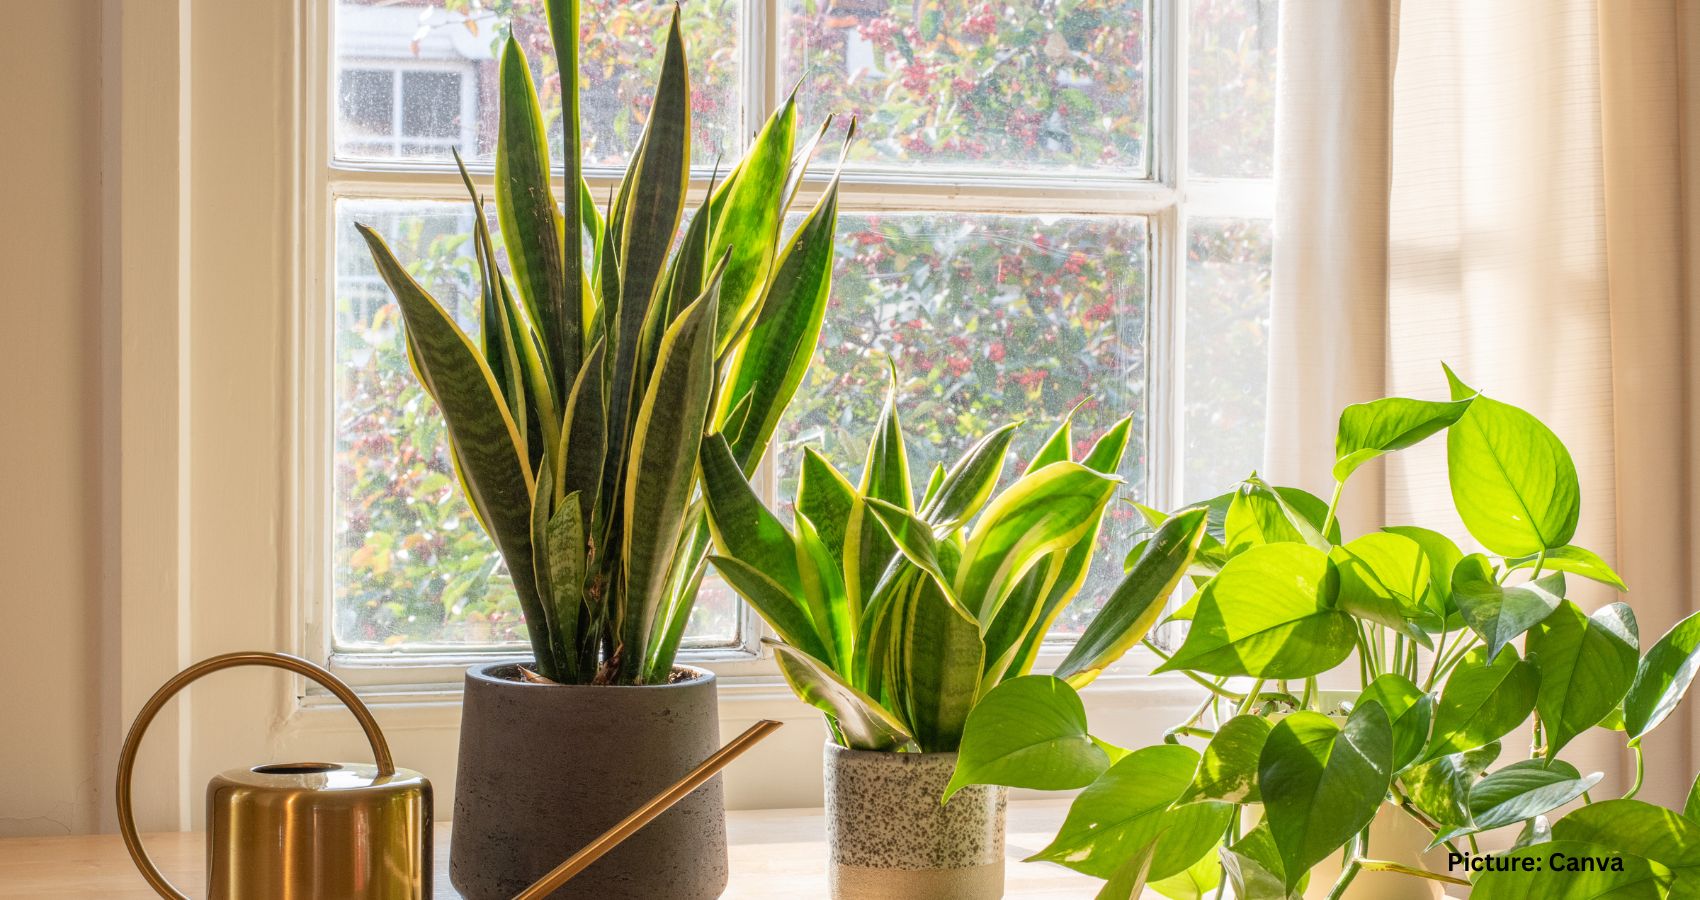 Cool Your Home Naturally: How Houseplants Can Help Beat the Summer Heat